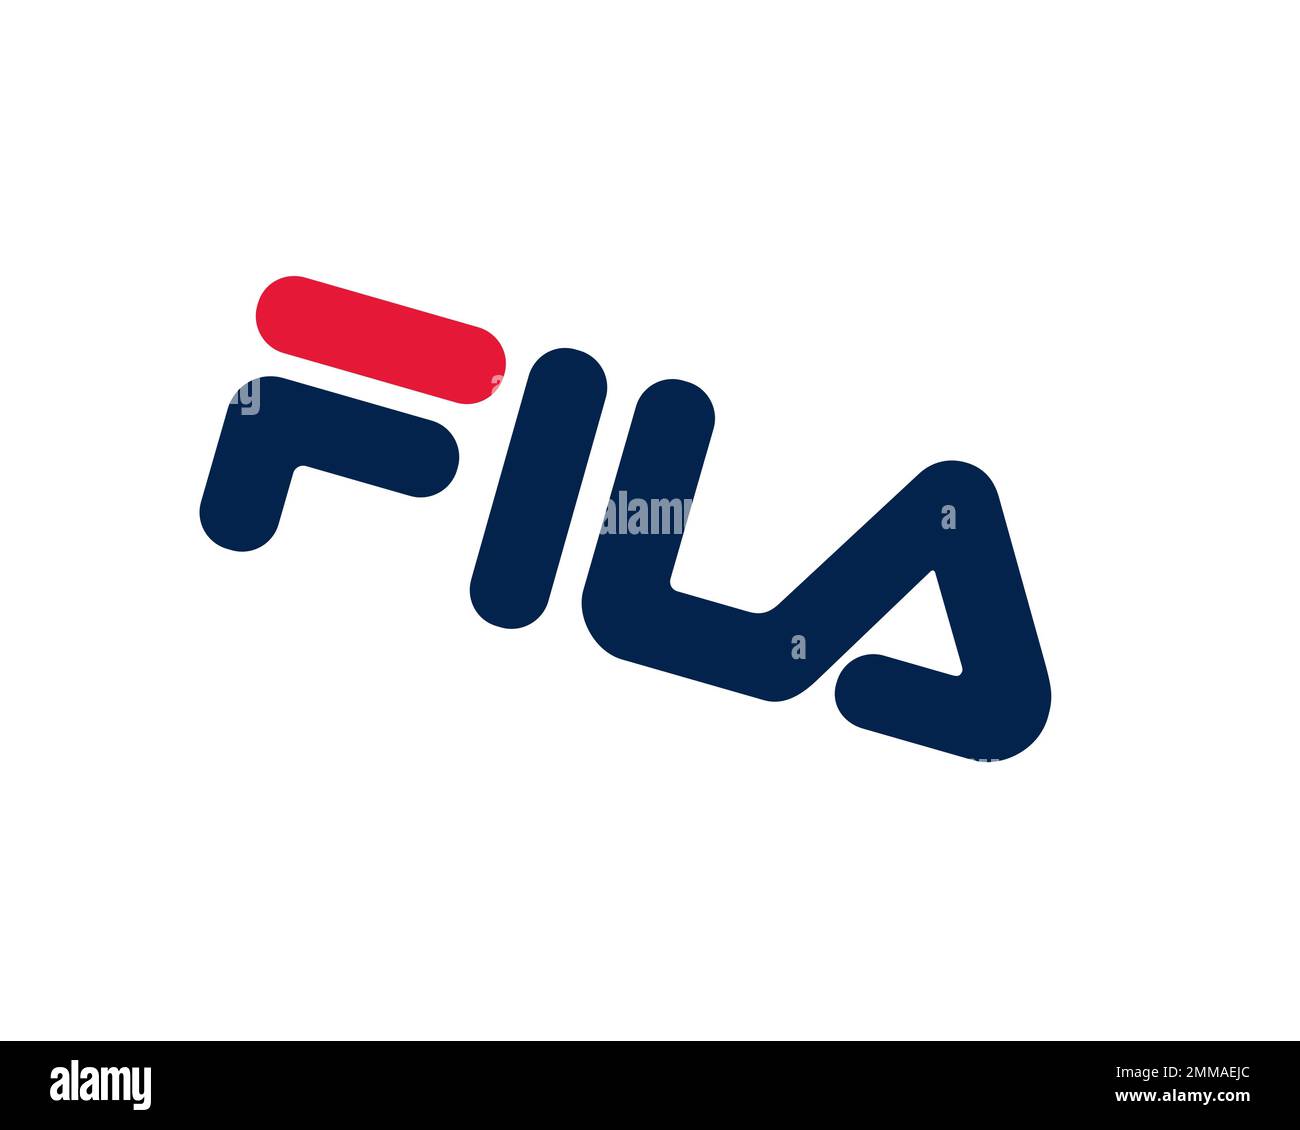 Fila+logo Cut Out Stock Images & Pictures - Alamy